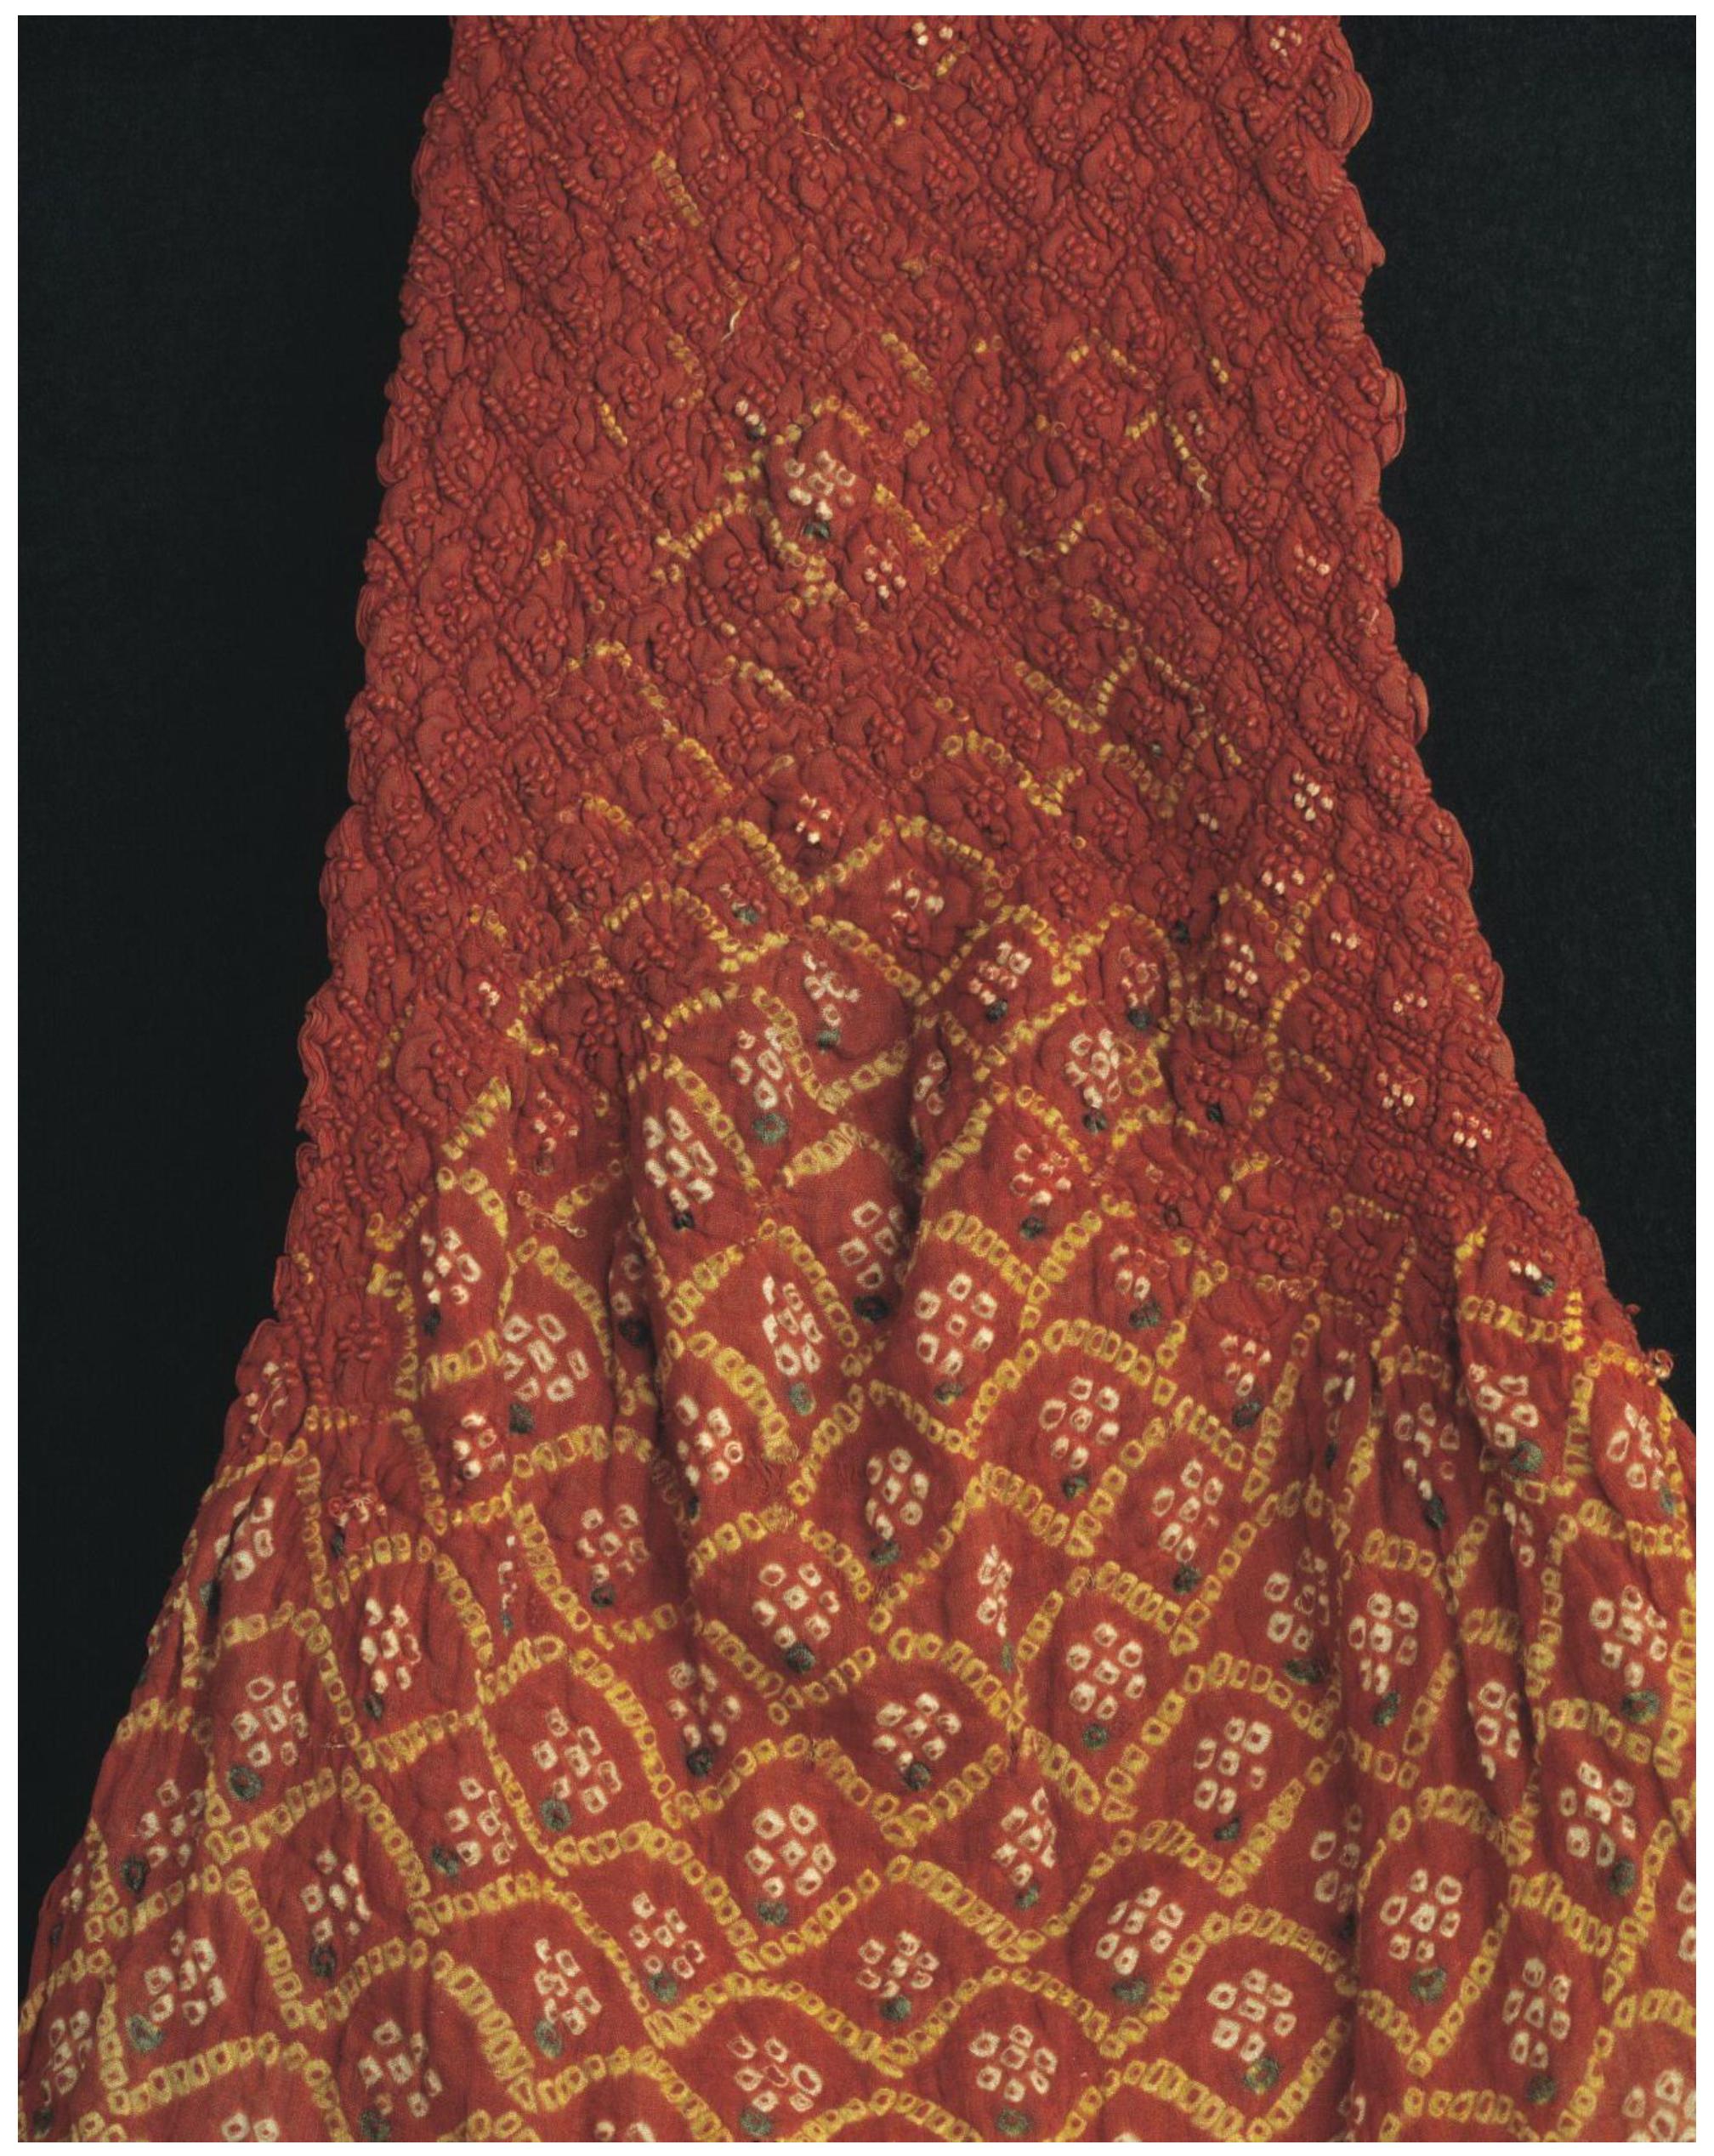 Modern Textile the Springtime: Full-Text Colors and and | Dyeing Poetry of Fleeting Free South in Art Religions | The Medieval Early Asia